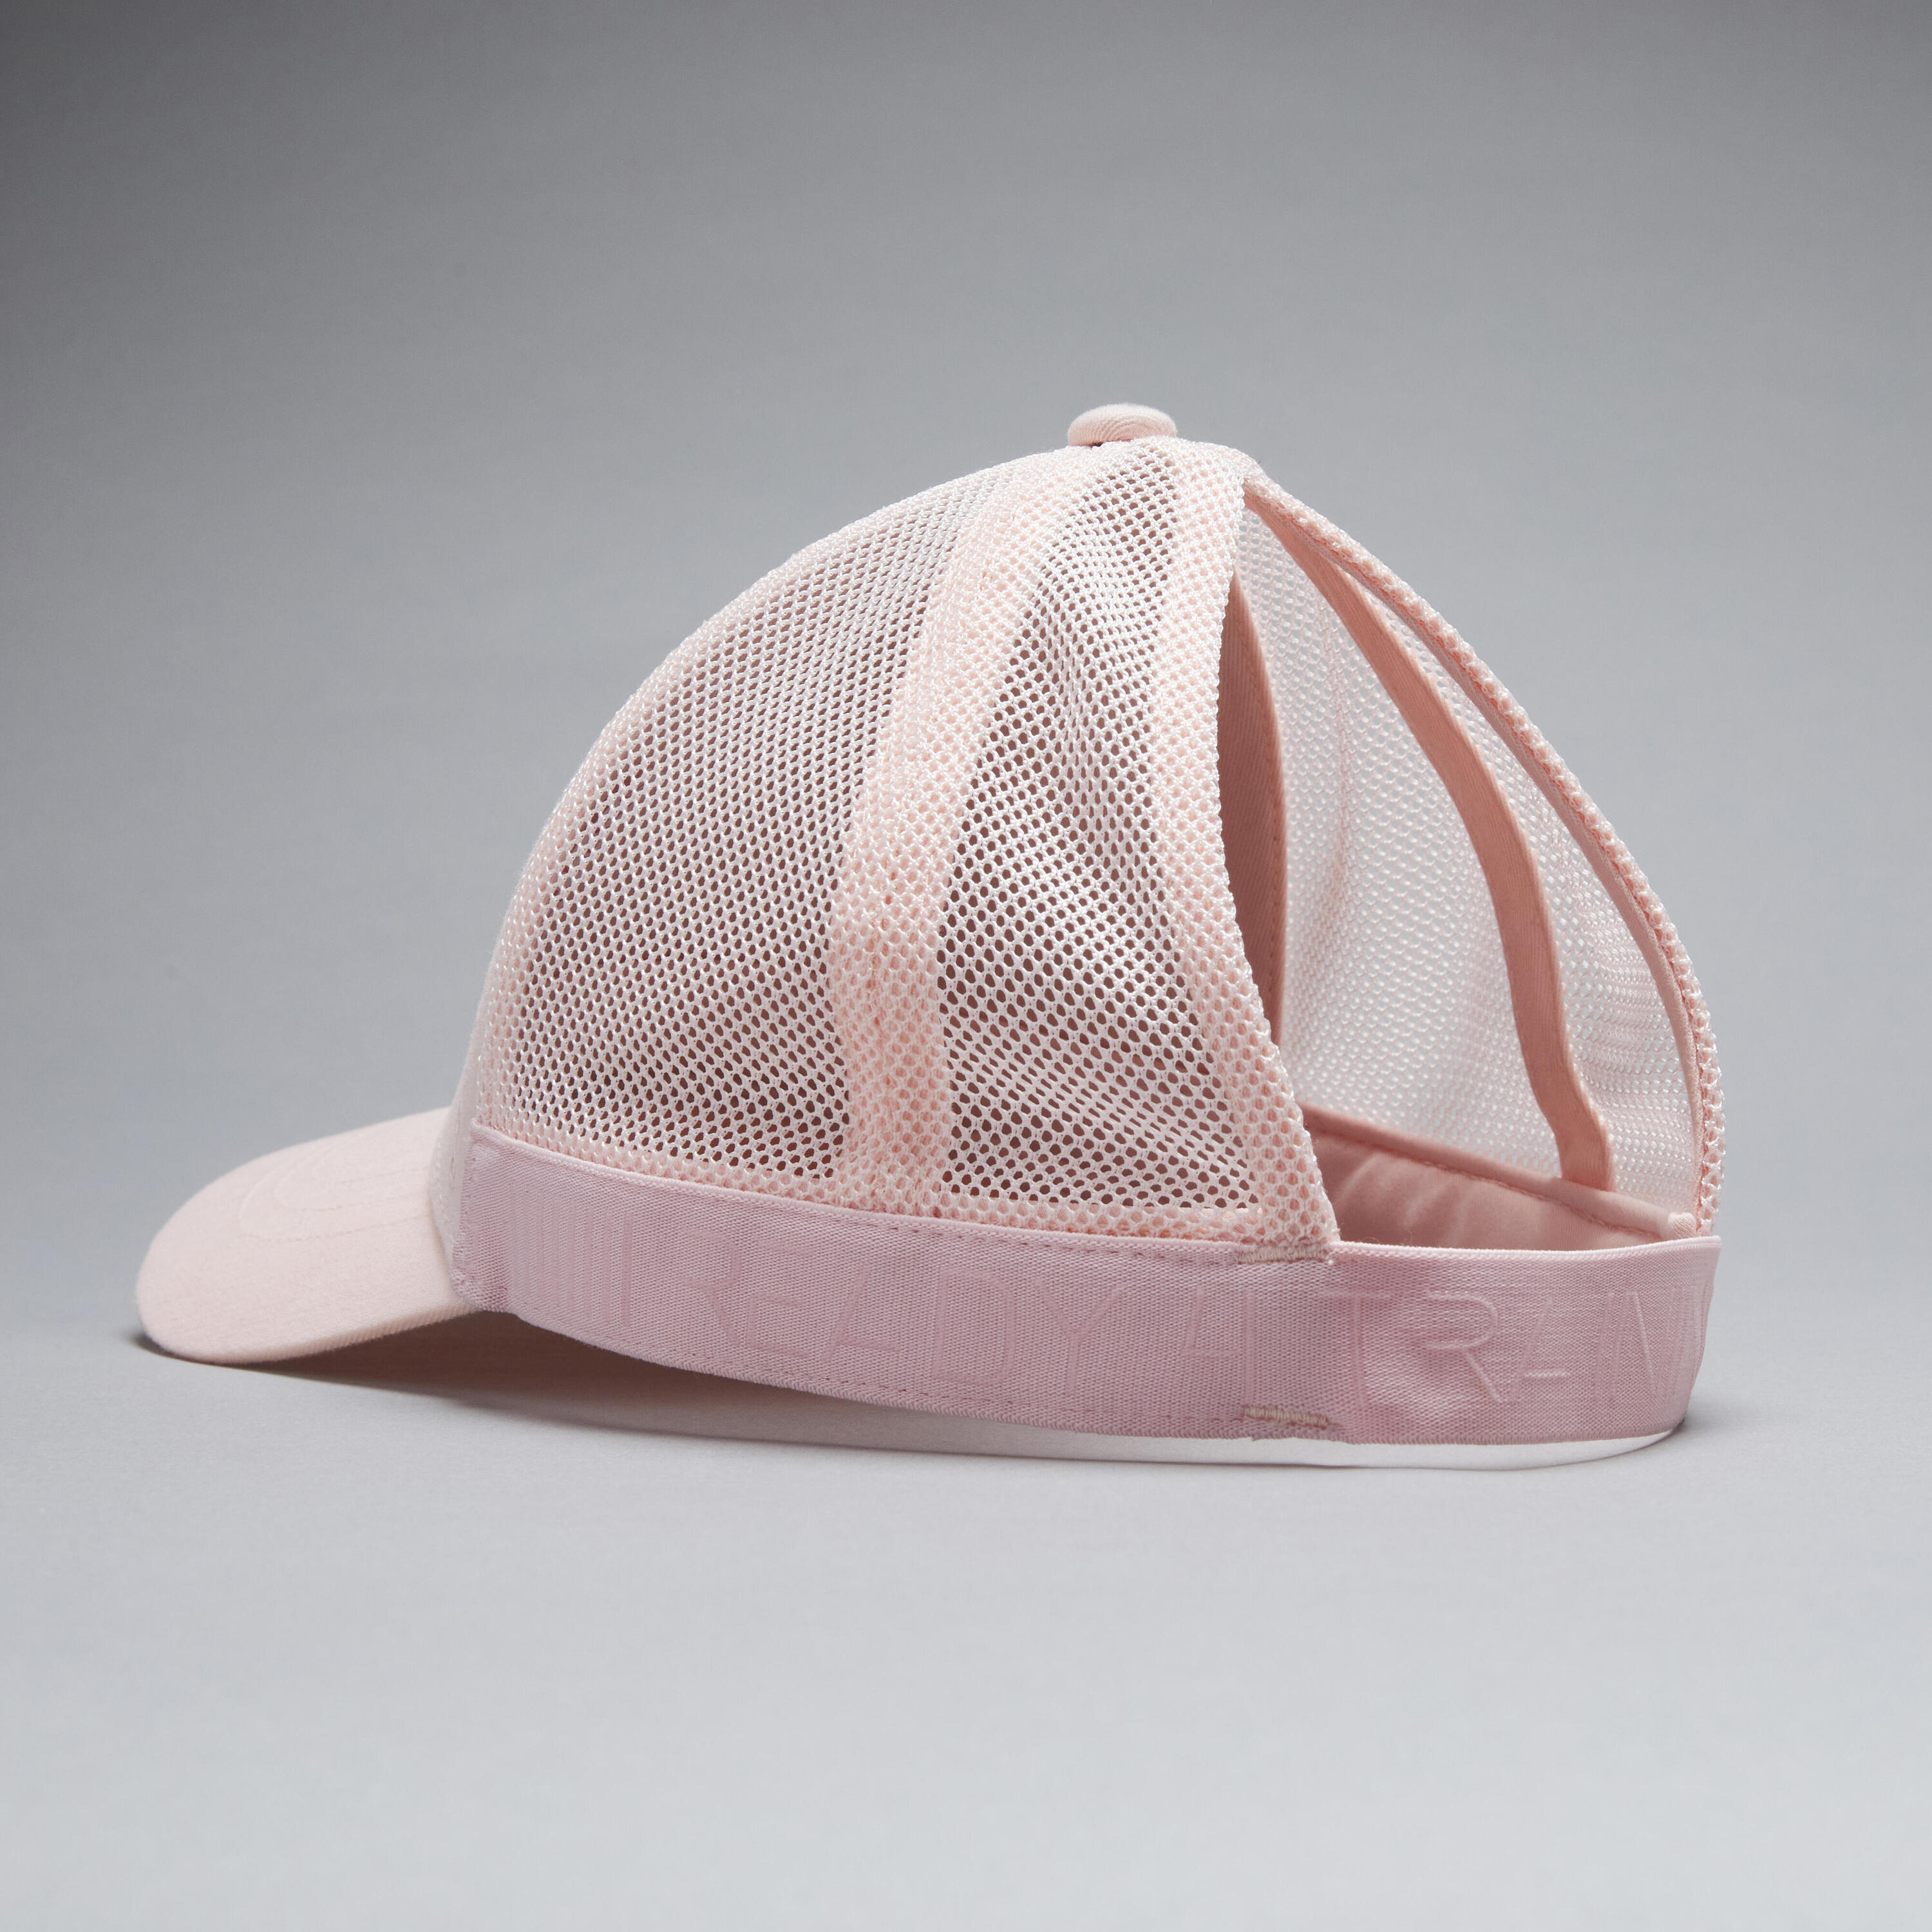 Breathable Cardio Fitness Cap - Pink 6/6